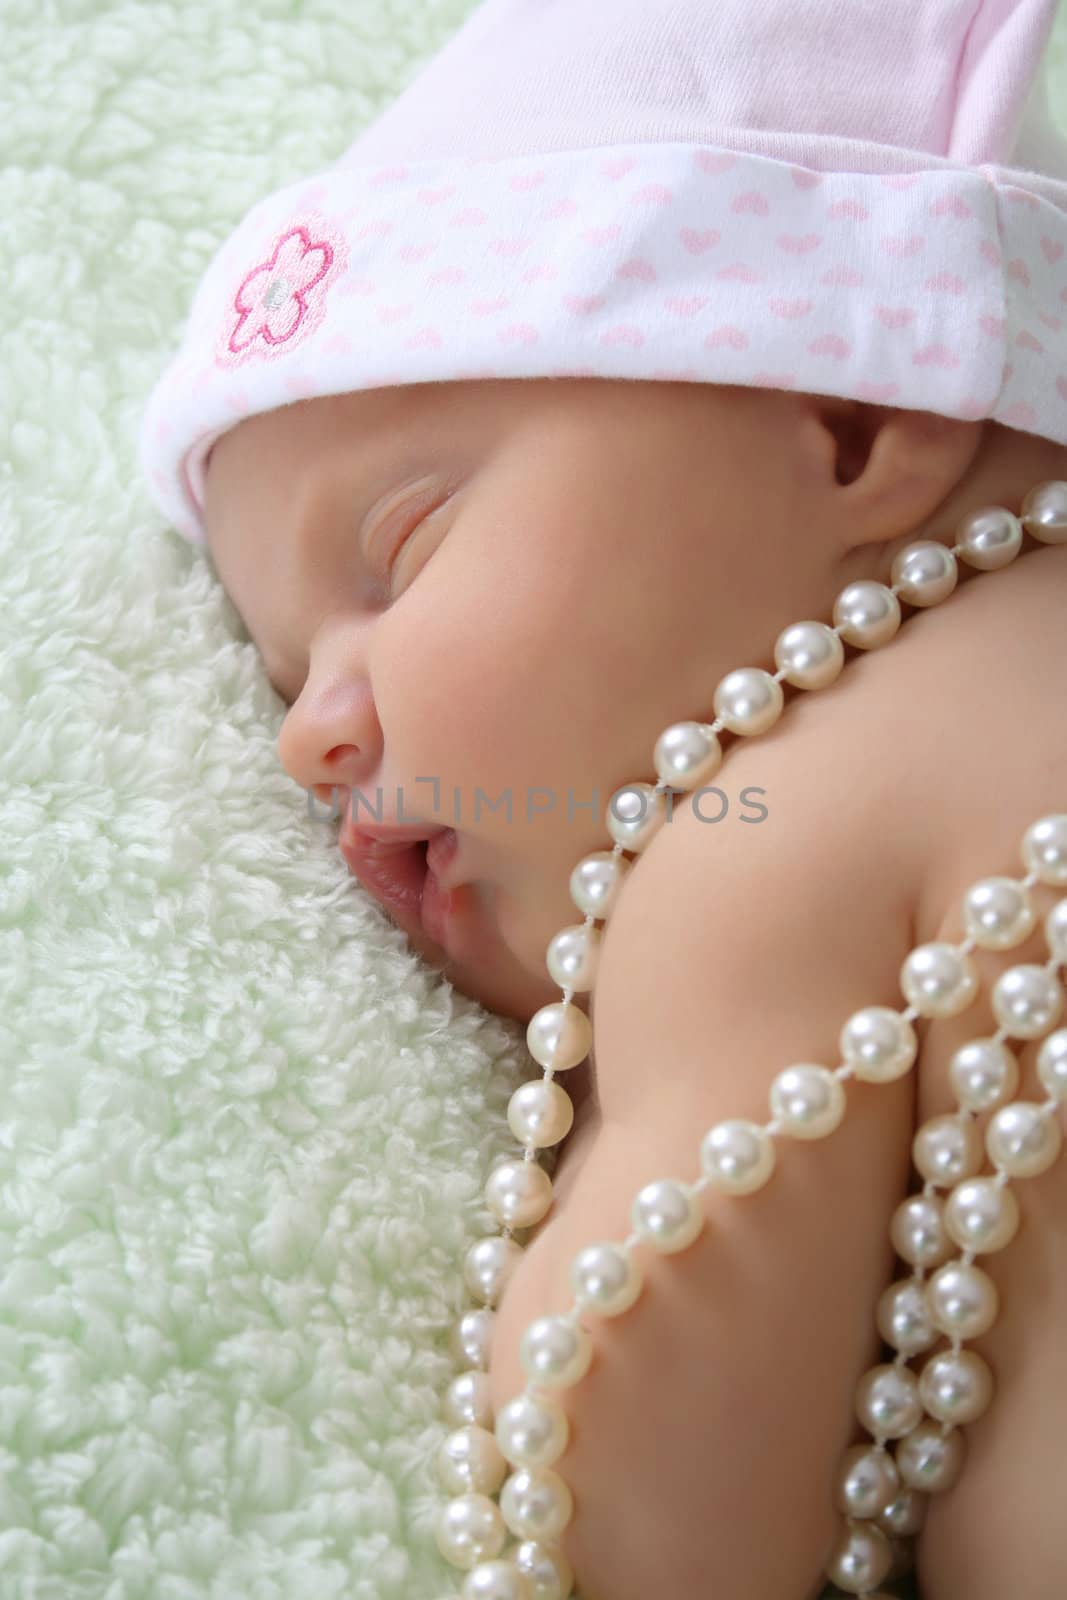 Beautiful newborn baby girl sleeping on a fluffy blanket with pearls draped